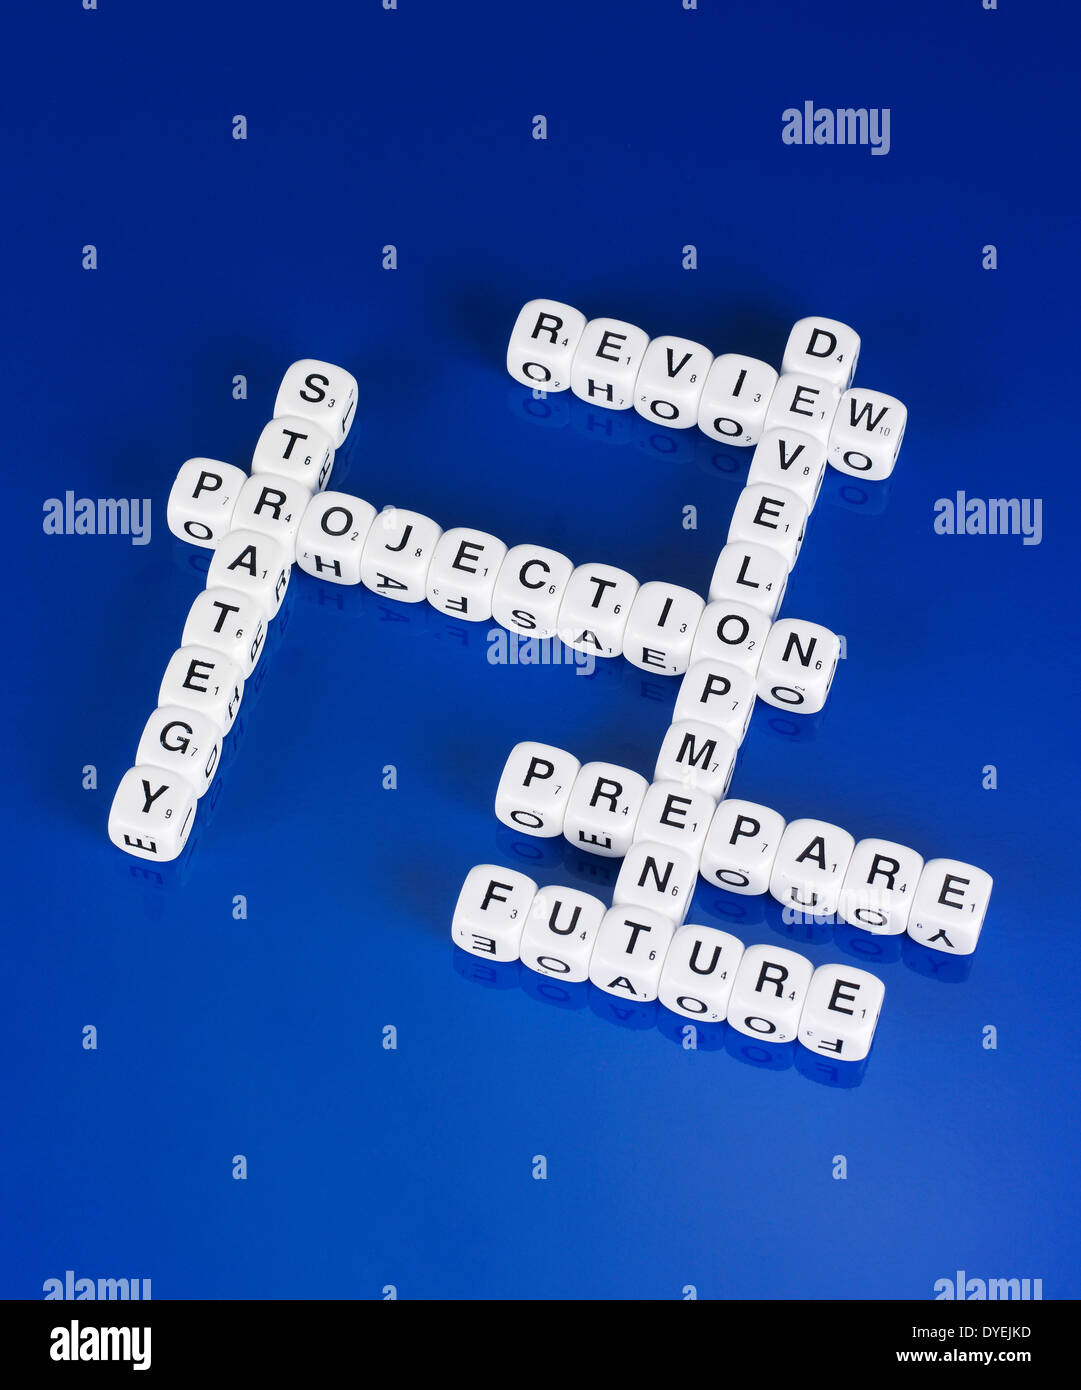 DICE SPELLING OUT WORDS IN A SCRABBLE LIKE FORMATION ON A BLUE BACKGROUND Stock Photo